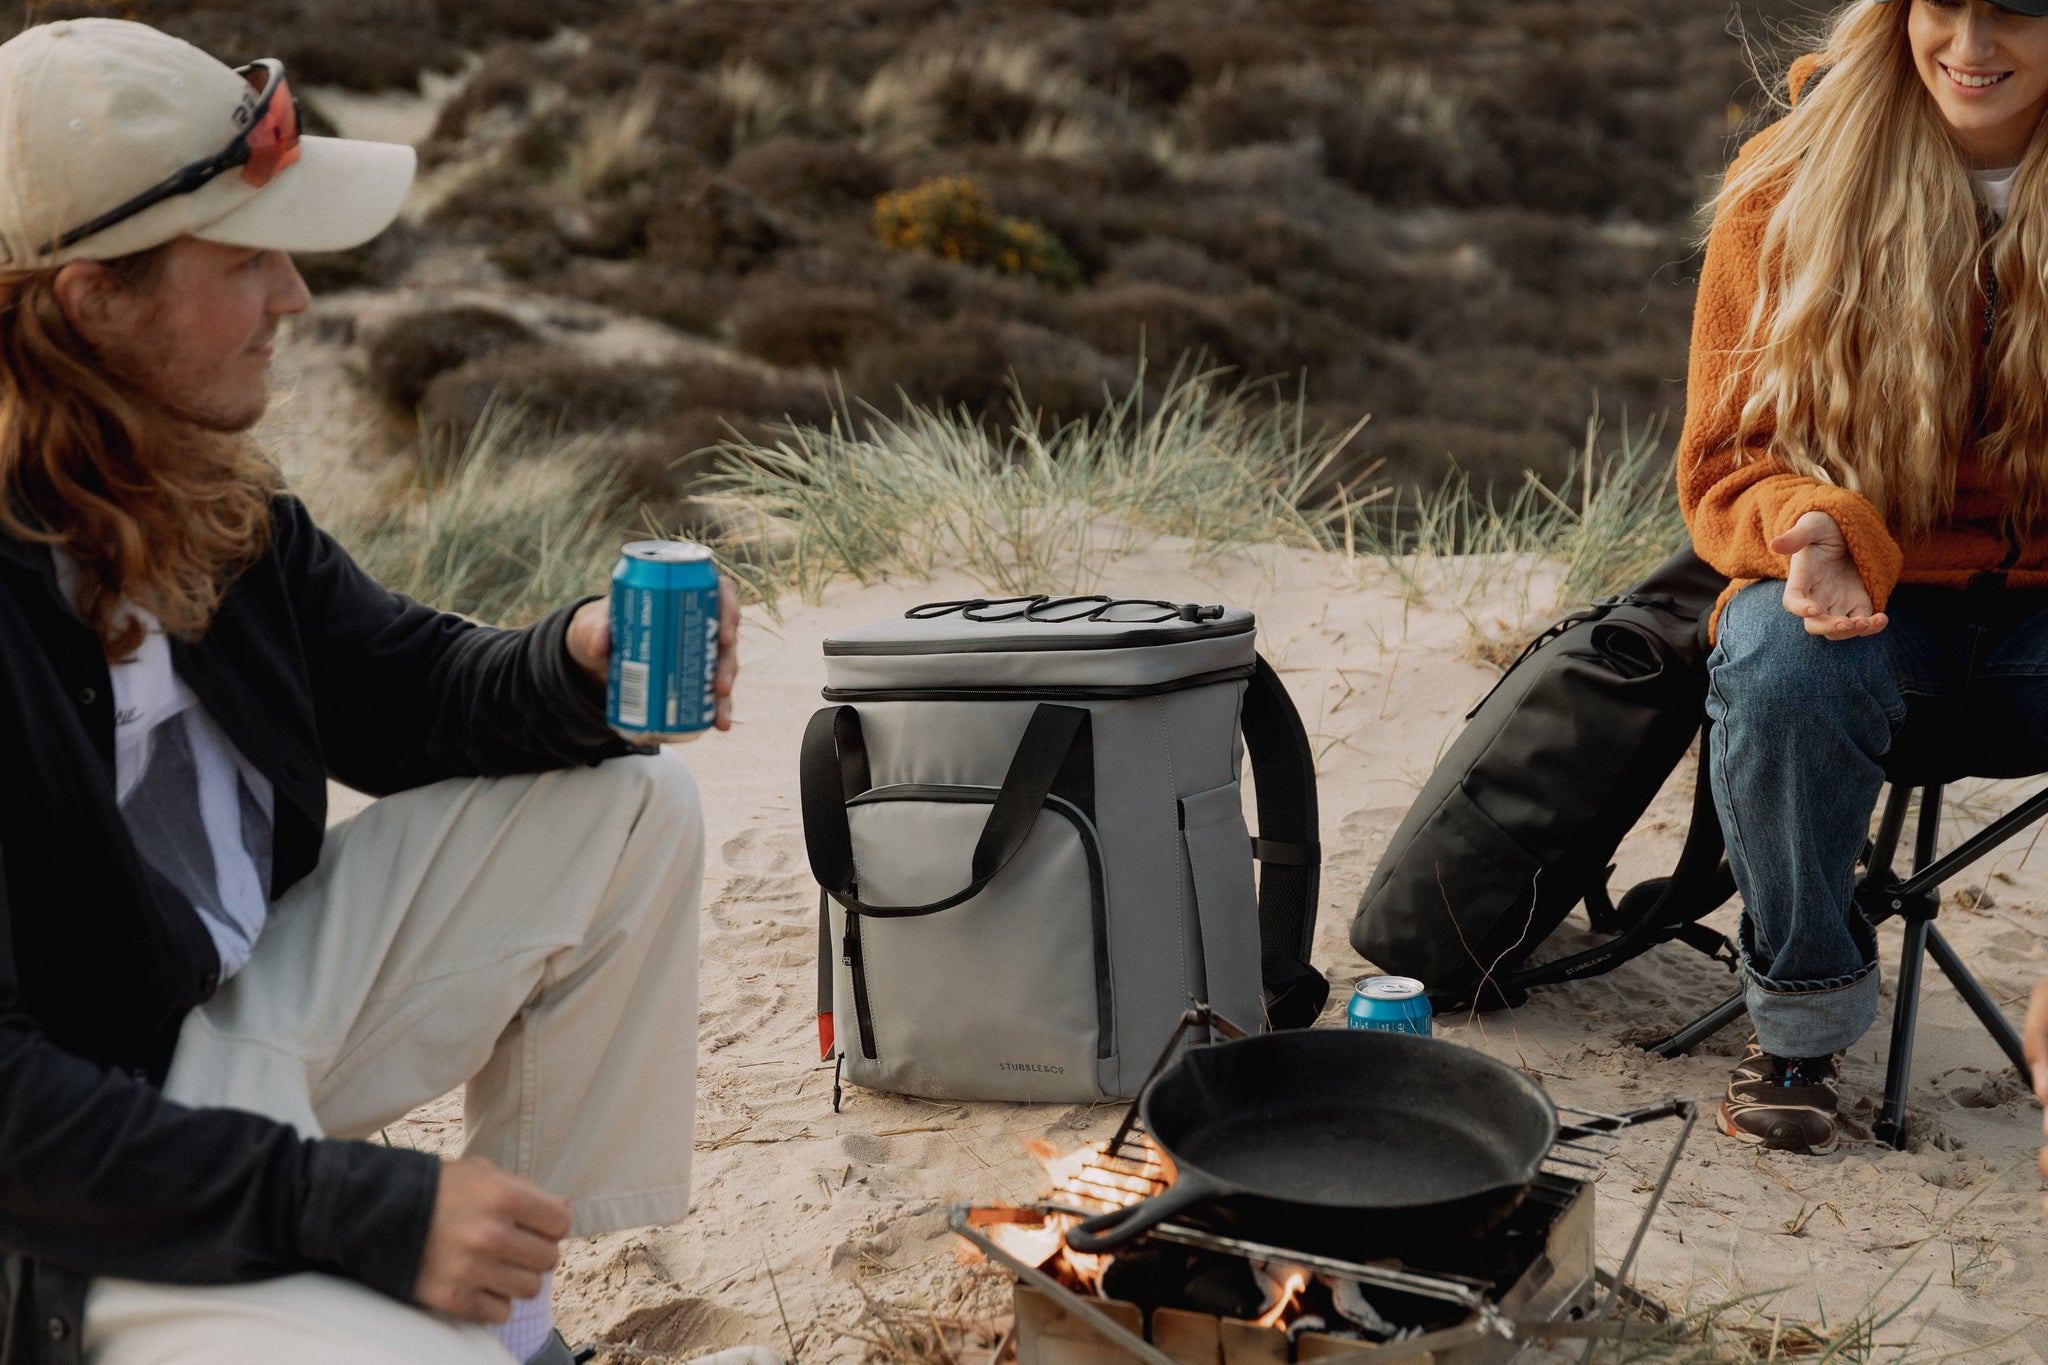 The Cooler backpack on a beach with people having picnic